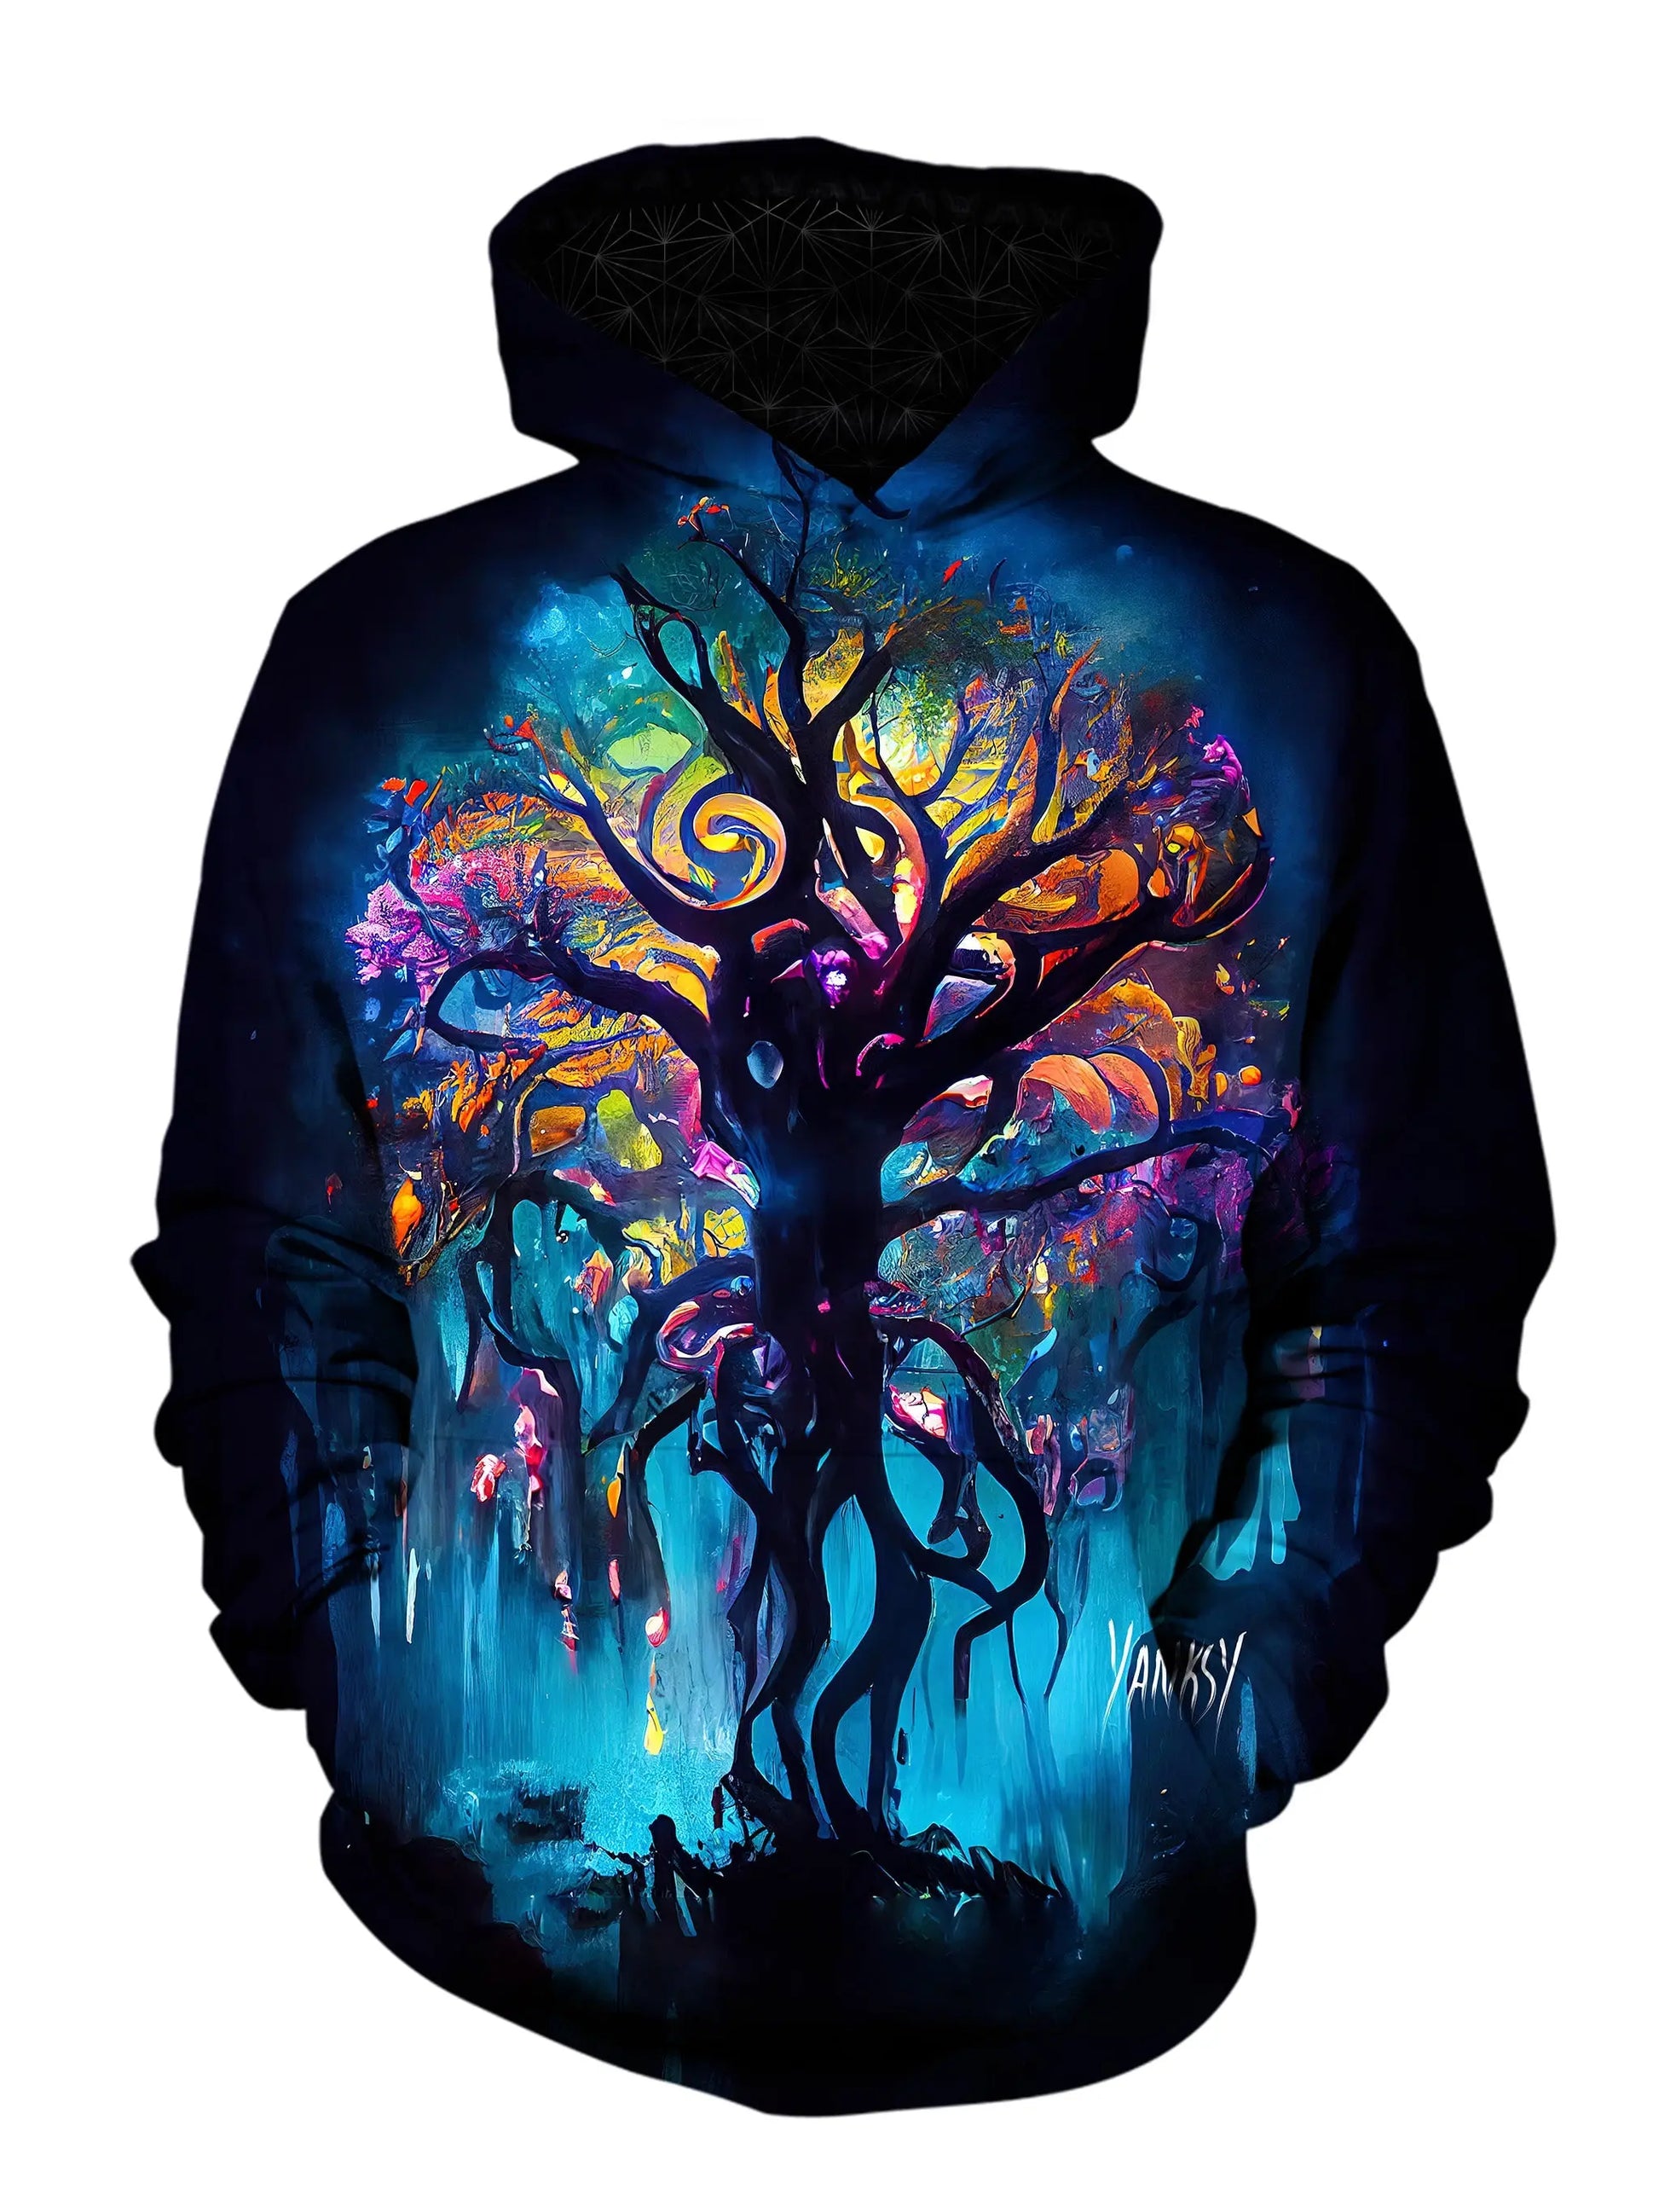 Turn heads wherever you go with this colorful and unique hoodie